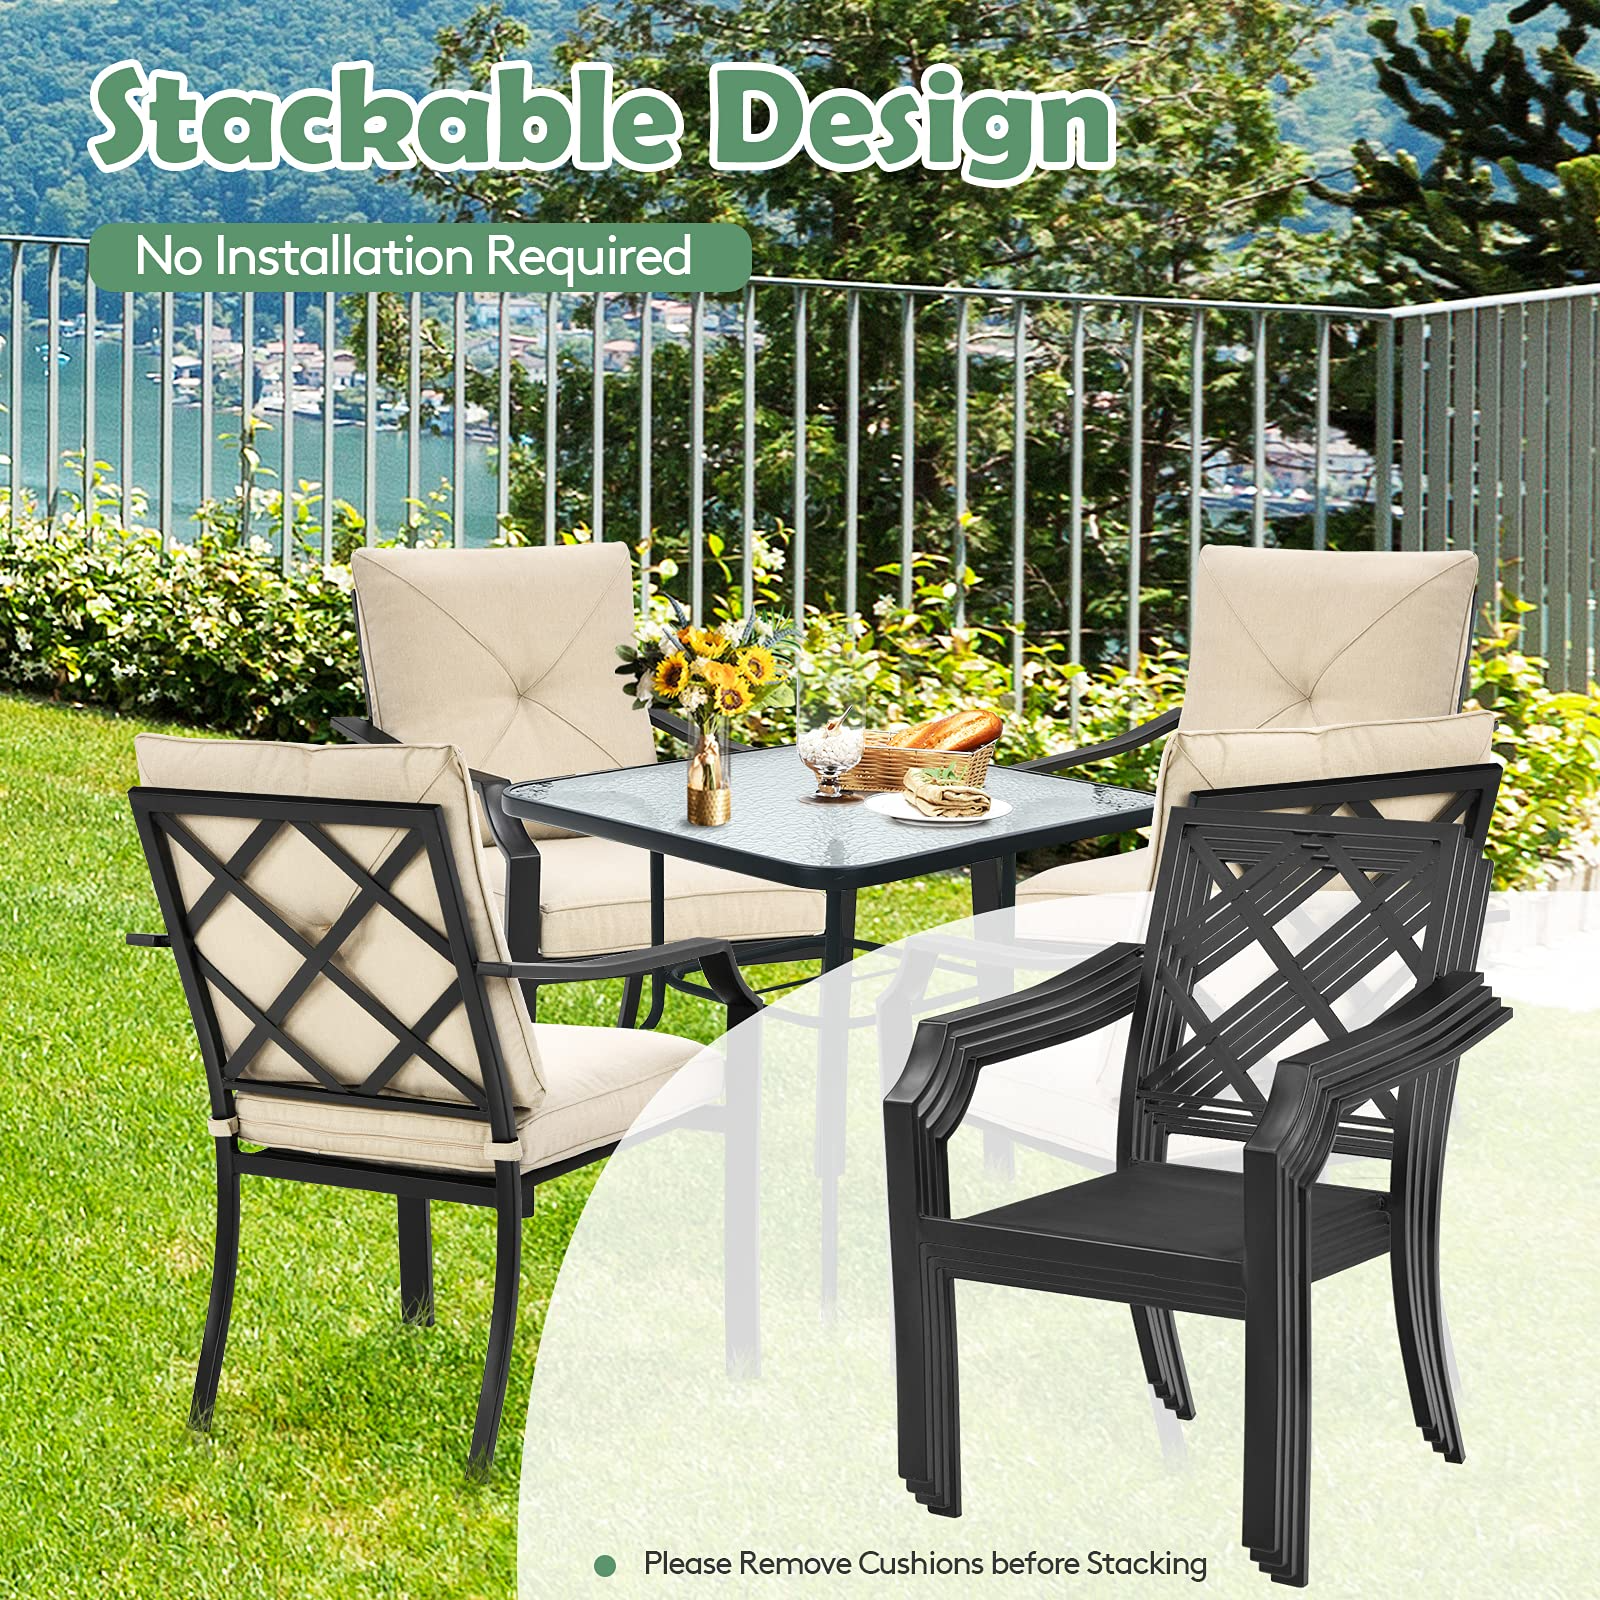 Giantex 4 Pieces Patio Chairs, Outdoor Lawn Chairs with Removable Cushions